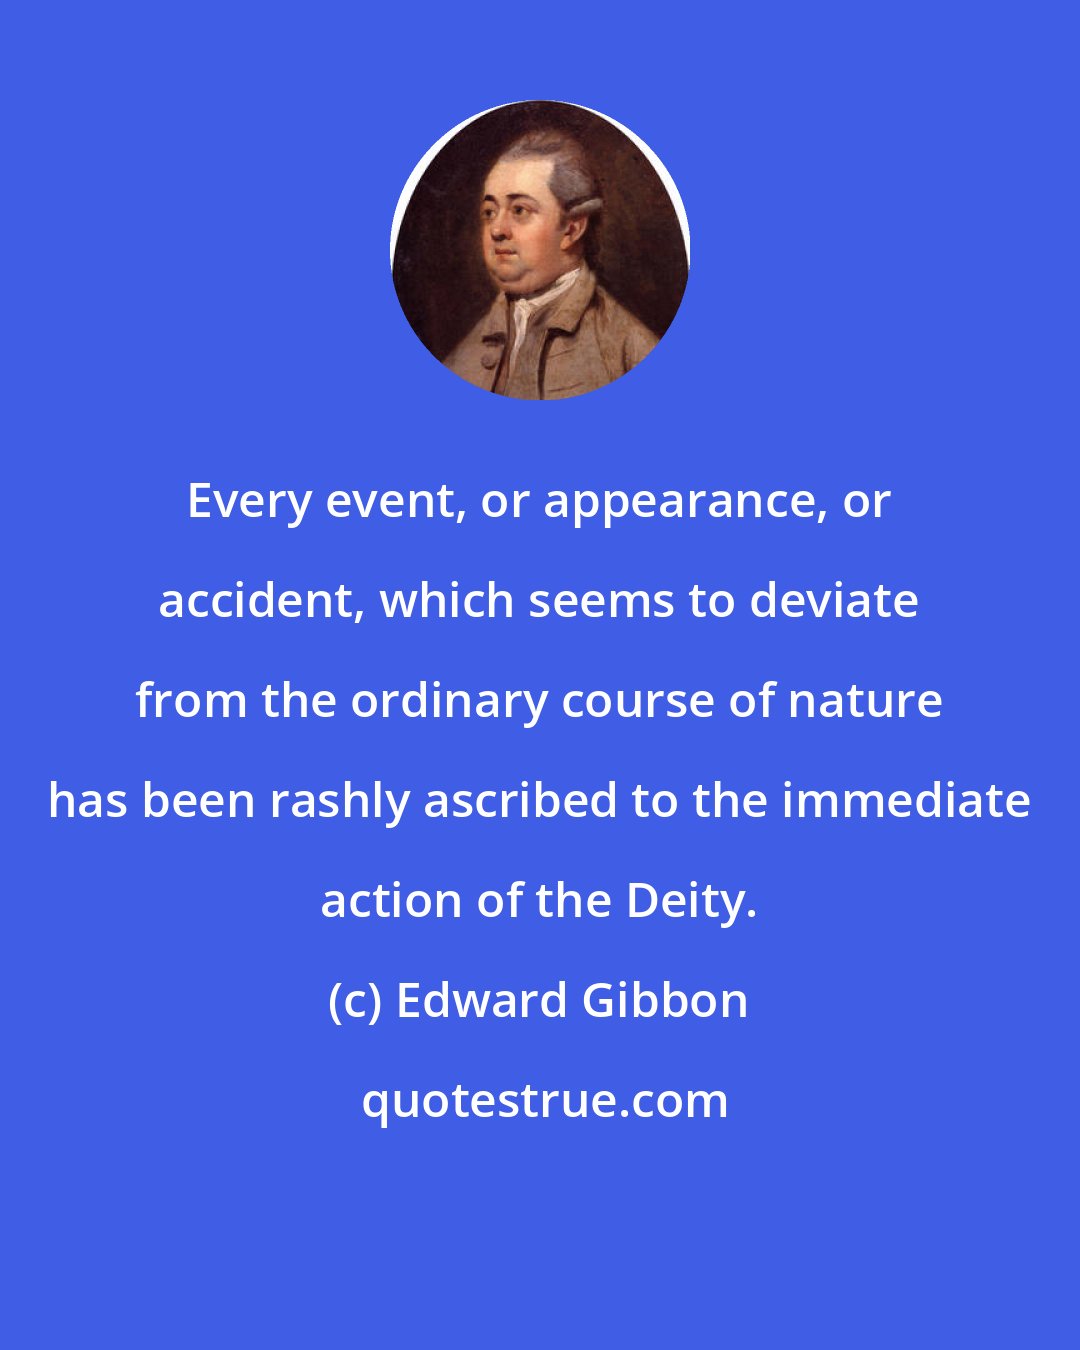 Edward Gibbon: Every event, or appearance, or accident, which seems to deviate from the ordinary course of nature has been rashly ascribed to the immediate action of the Deity.